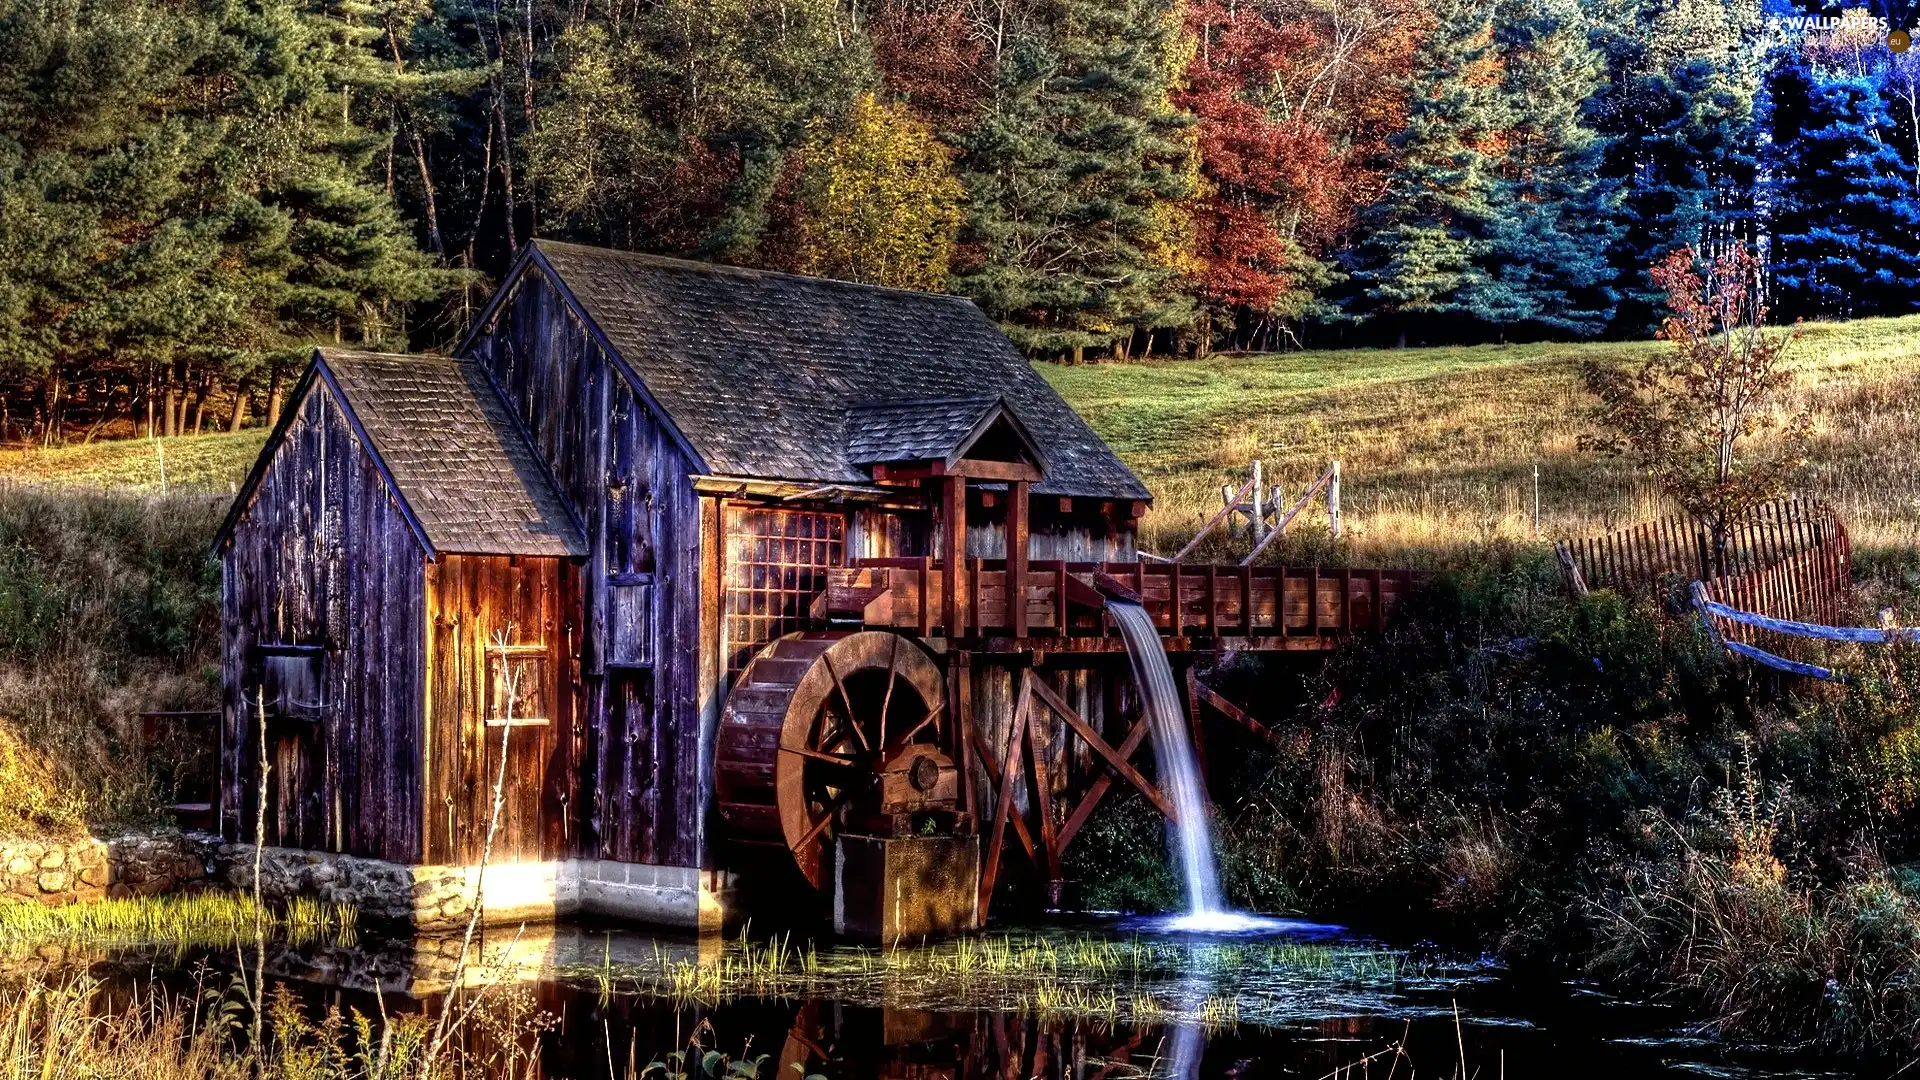 Old car, River, forest, Windmill